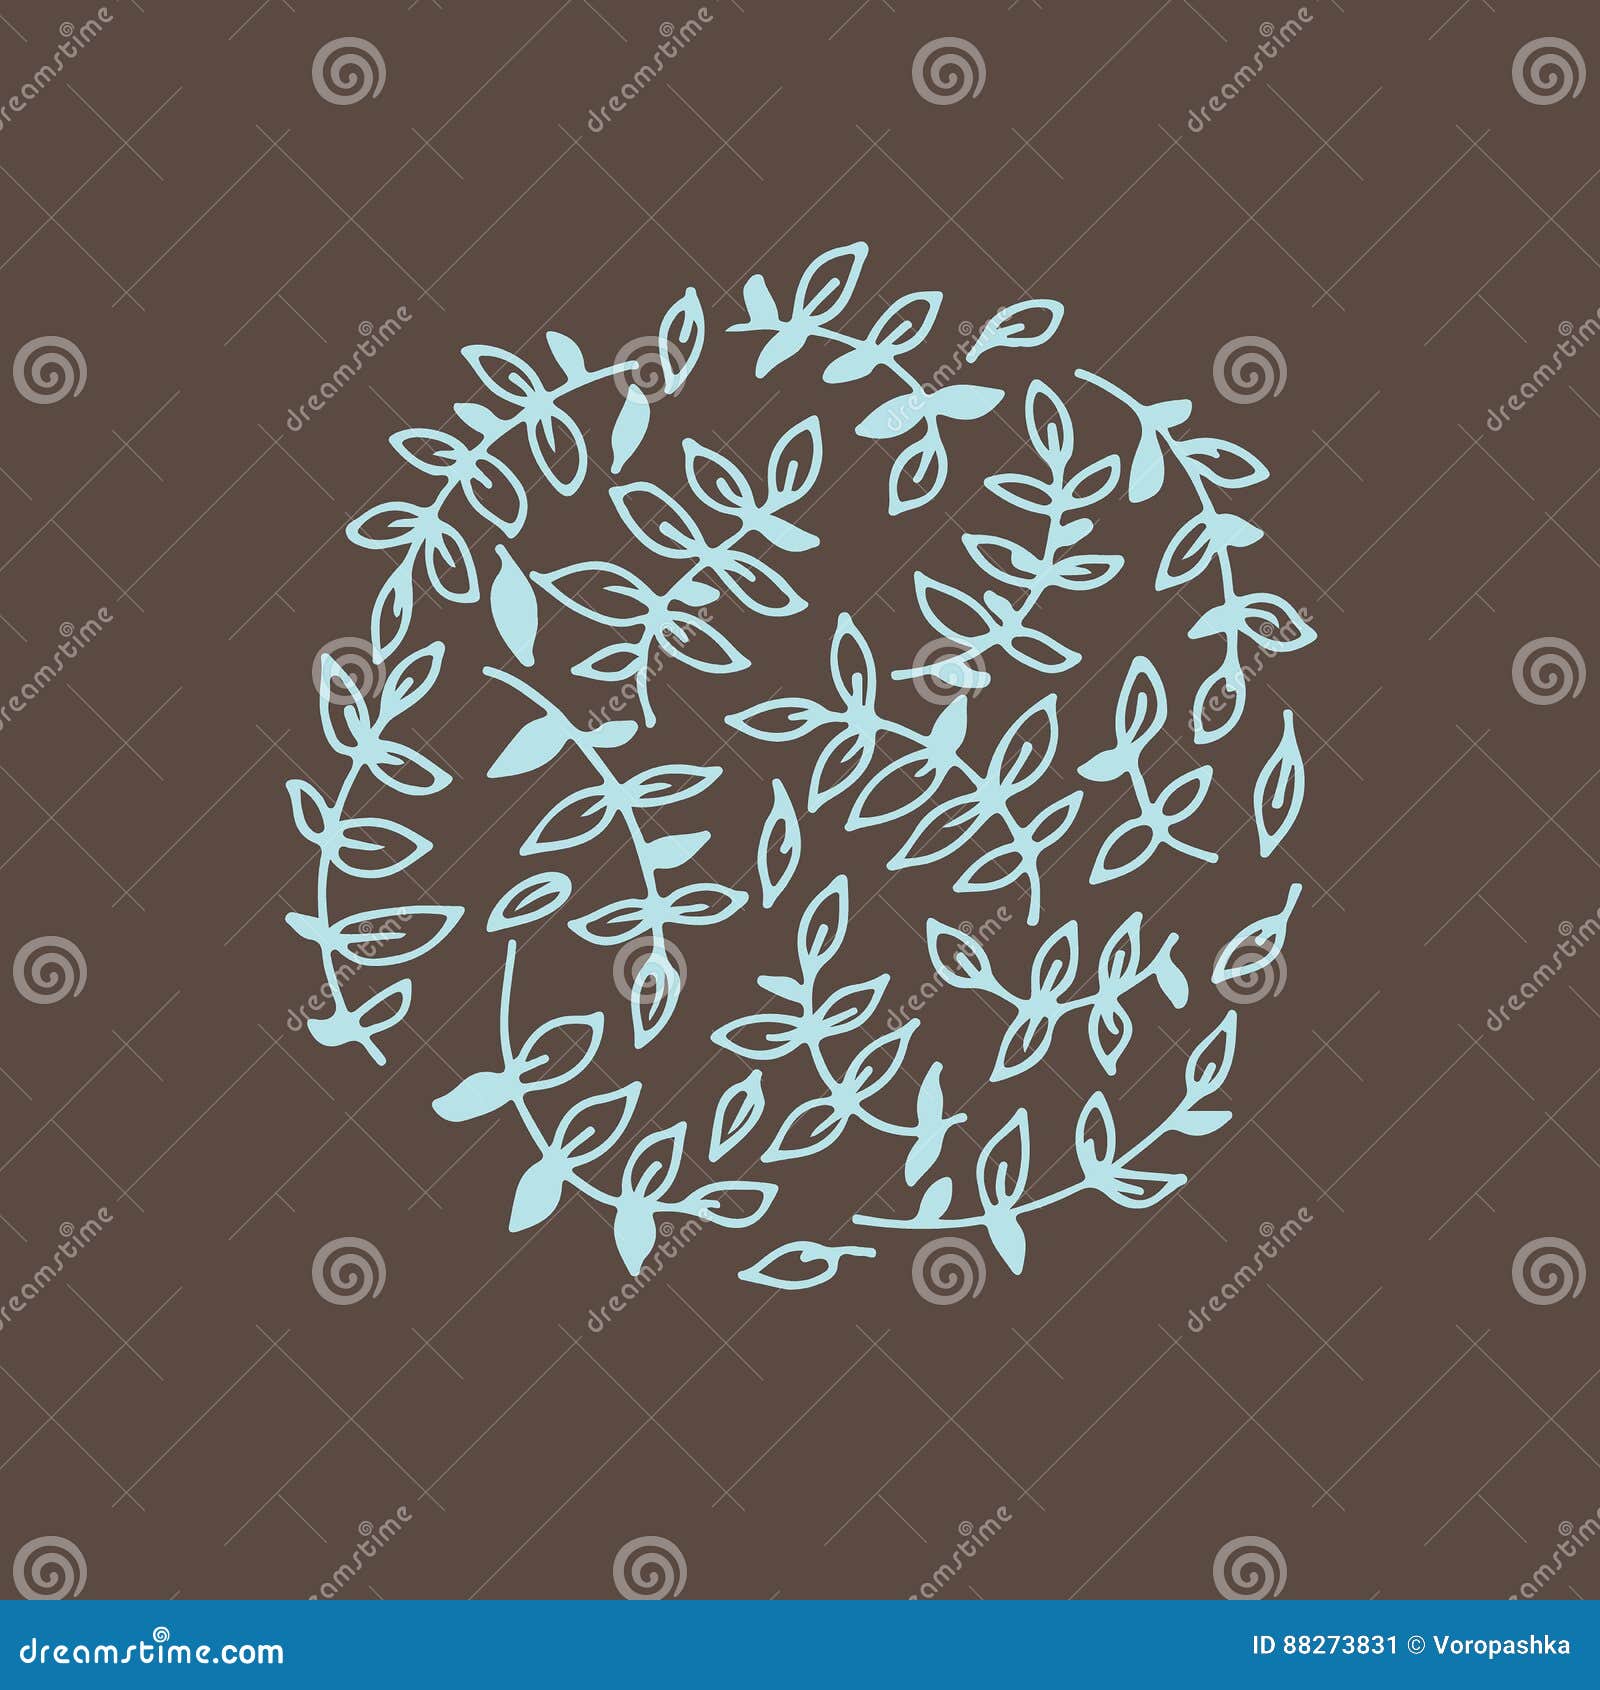 Terms of branches stock vector. Illustration of decoration - 88273831